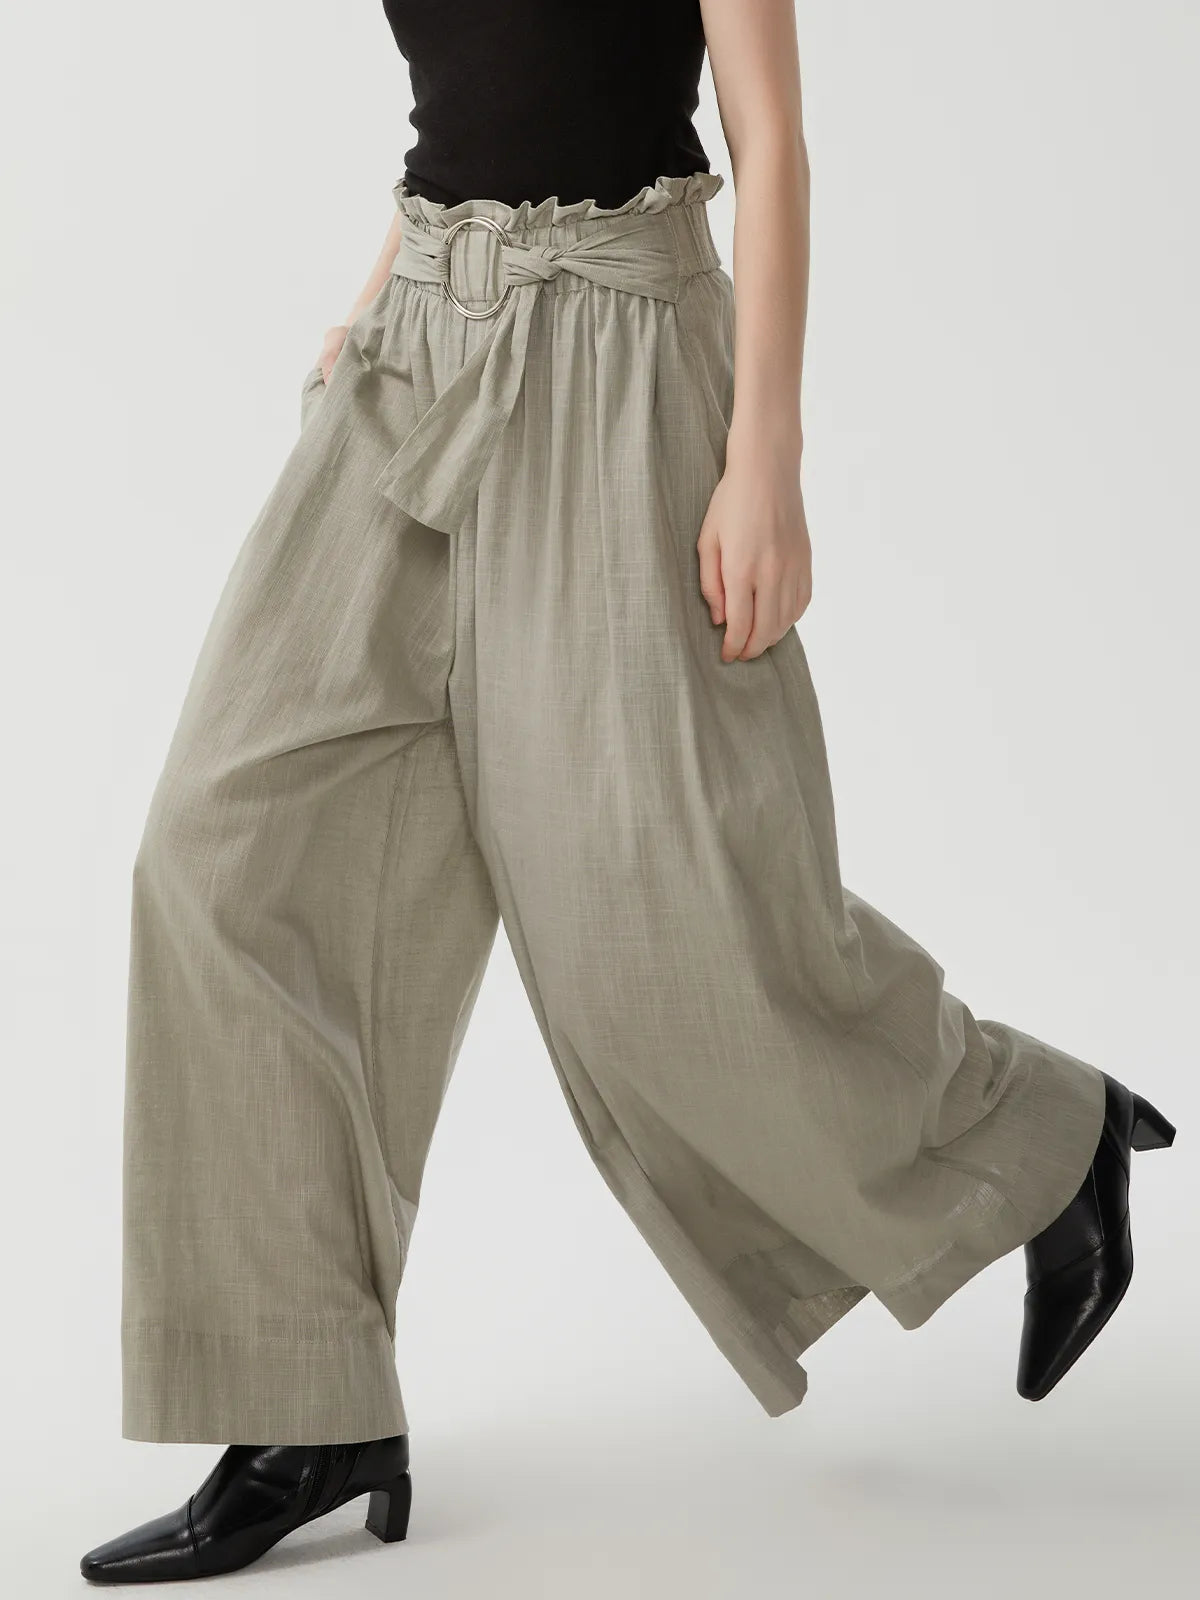 High-waisted linen trousers with a vintage aesthetic and natural texture